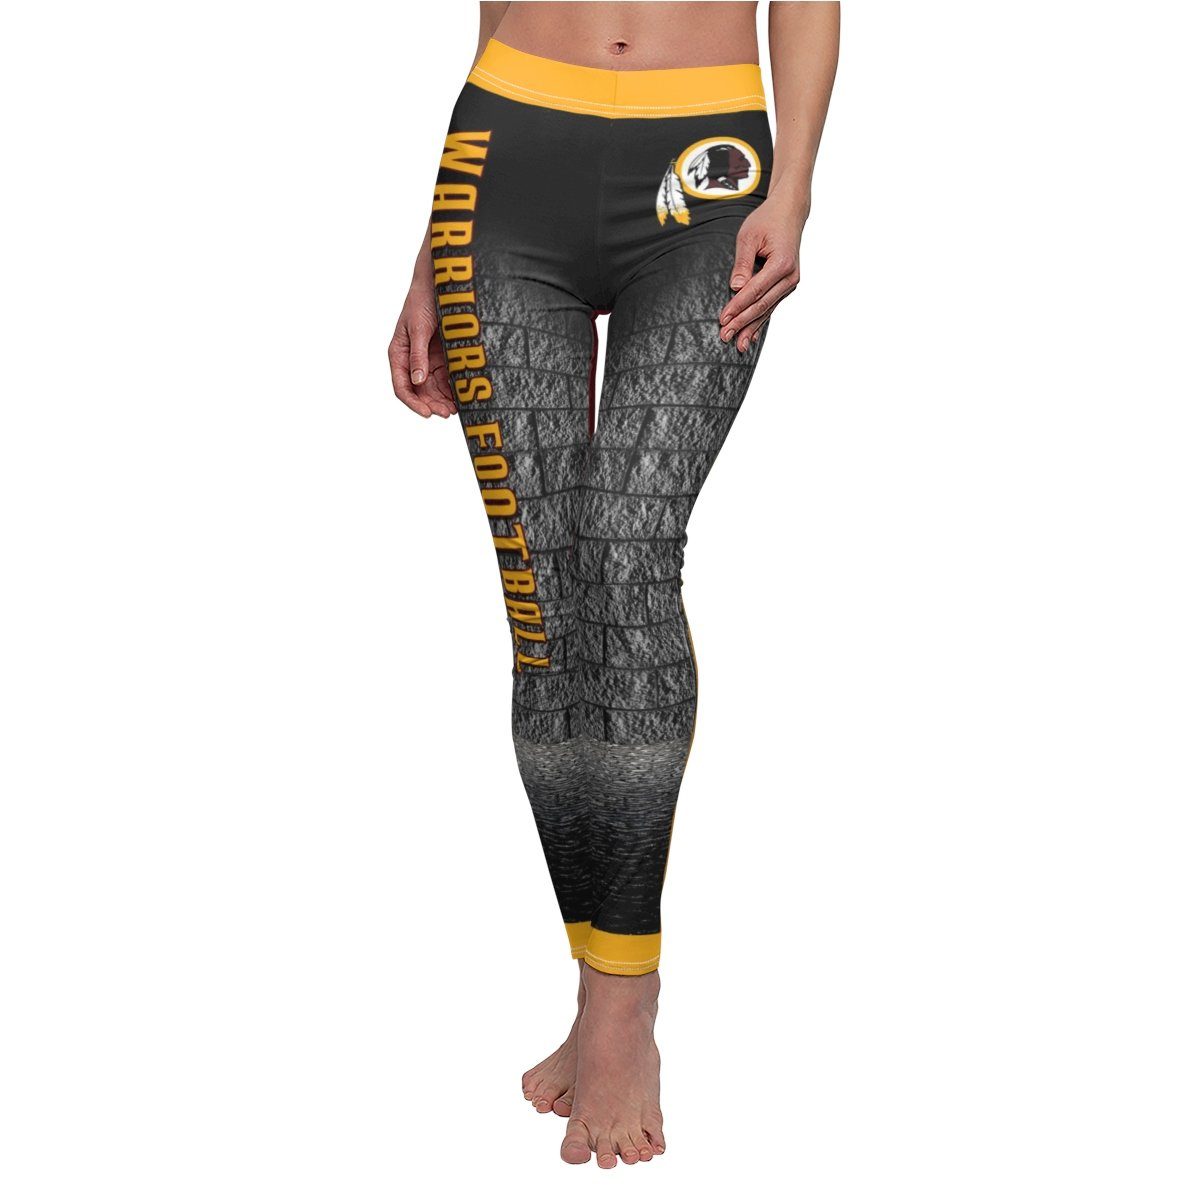 Dungeon - V.2 - Extreme Sportswear Cut & Sew Leggings Template-Photoshop Template - Photo Solutions